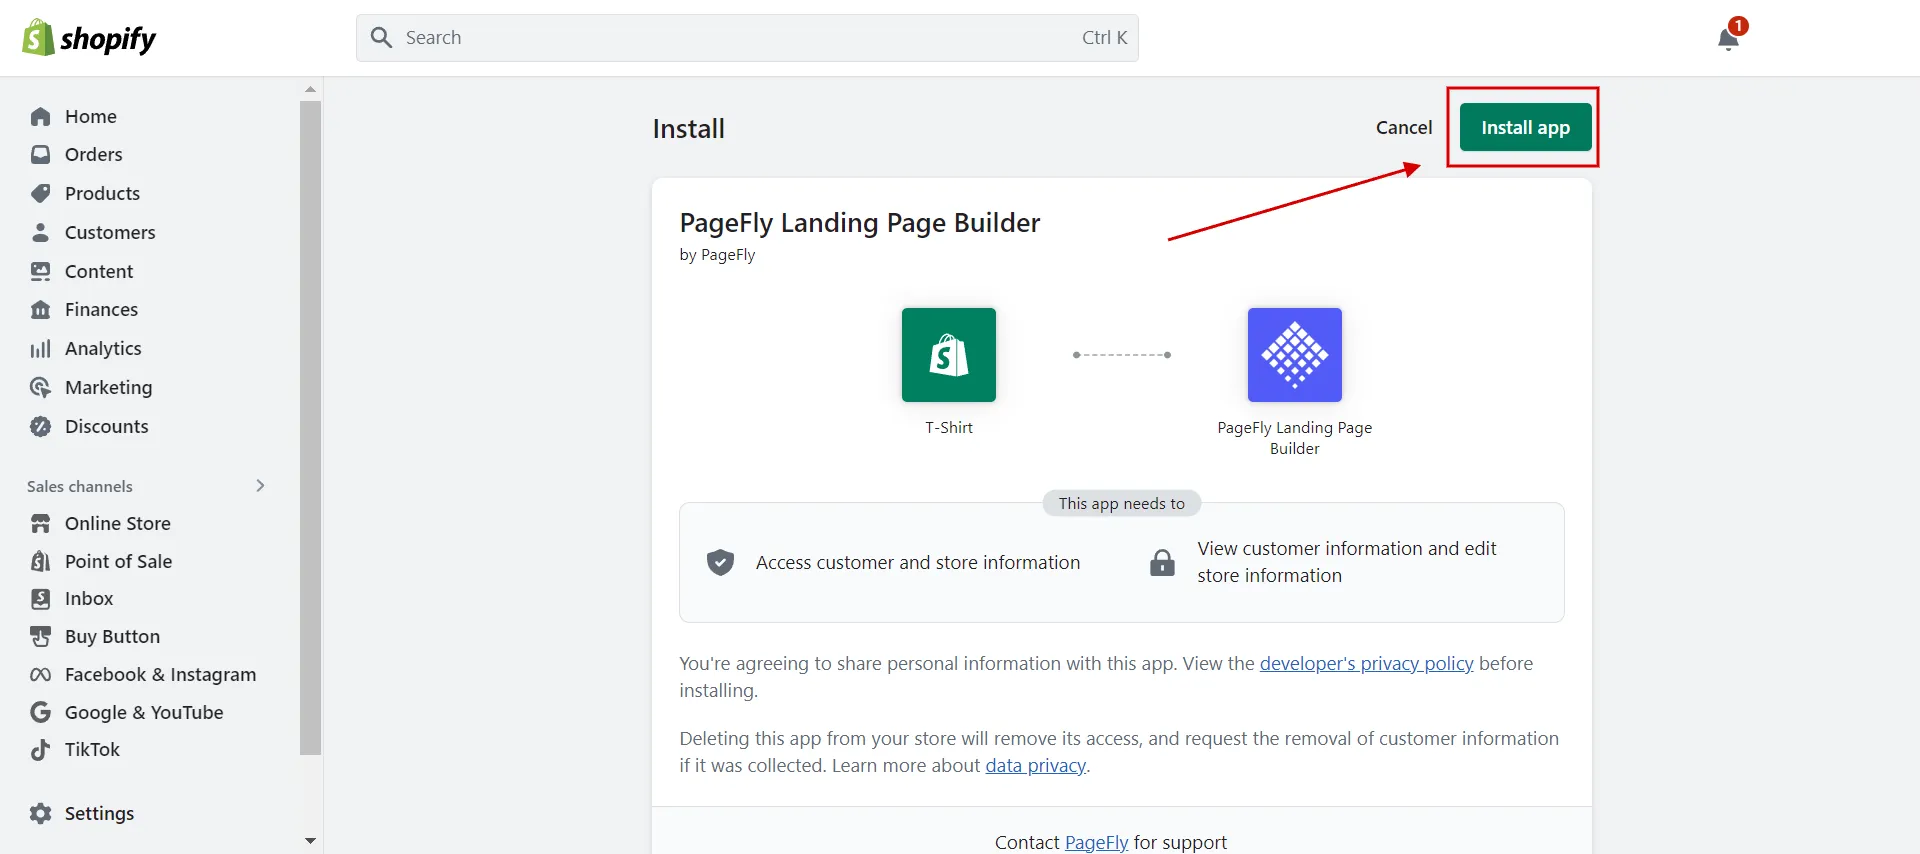 Install PageFly Landing Page Builder app